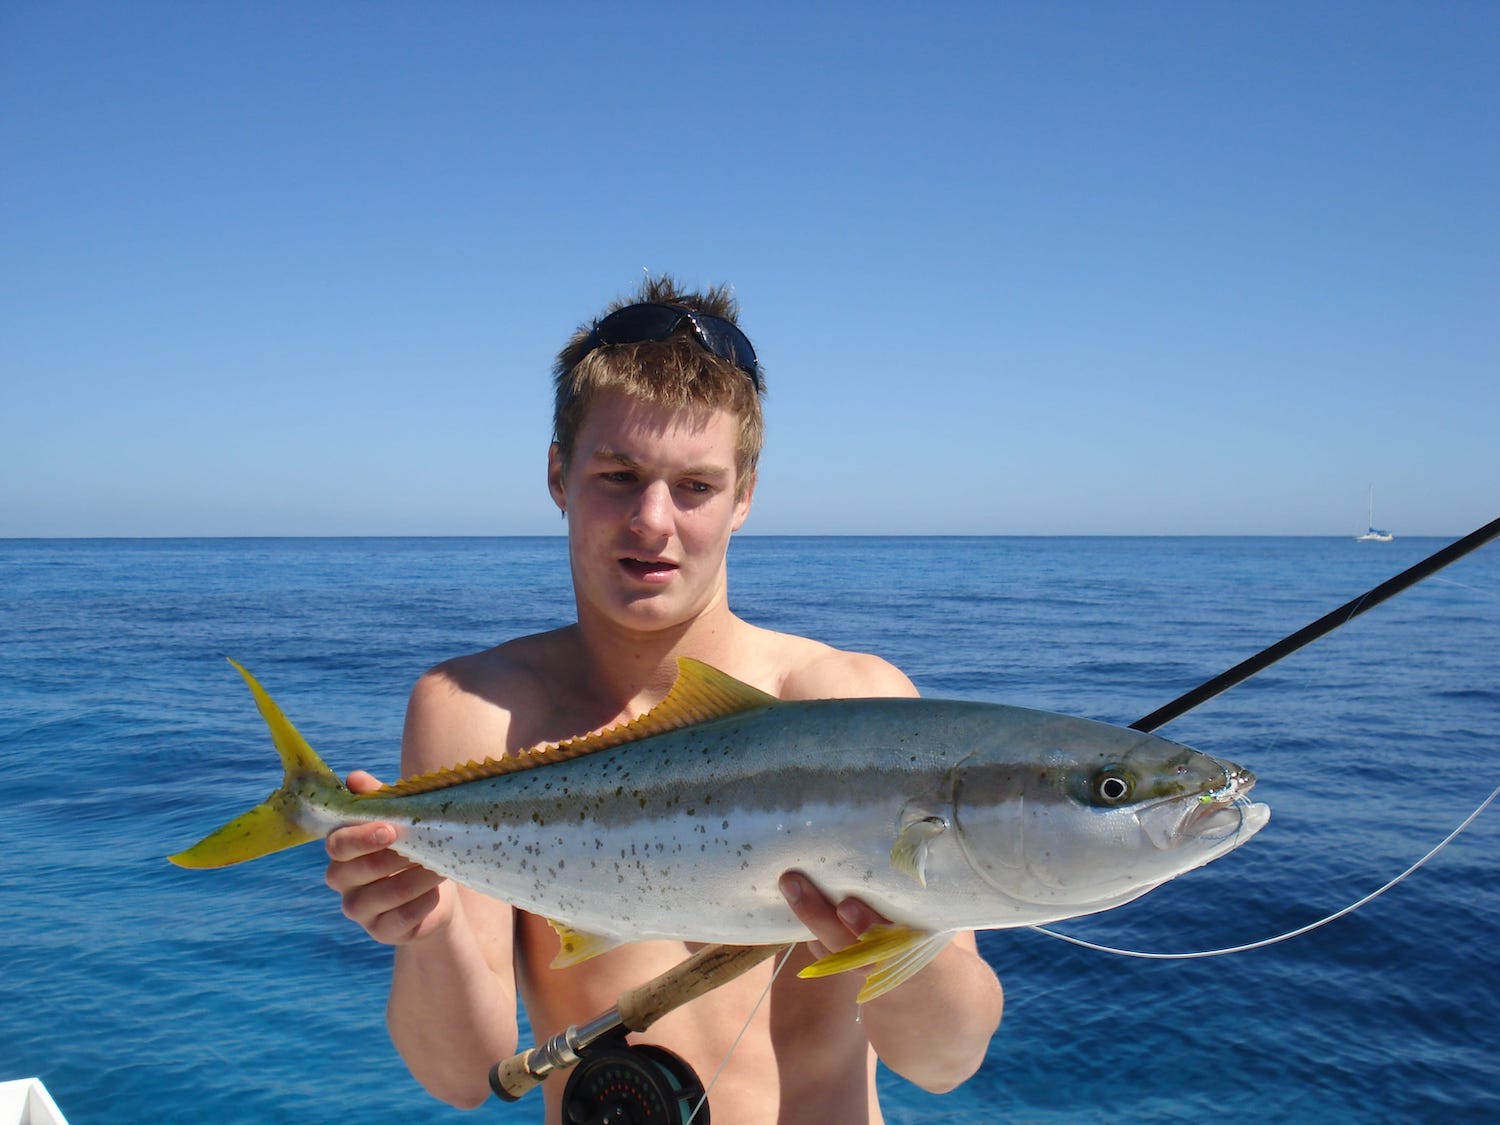 Going fishing - great tips for catching local yellowtail kingfish